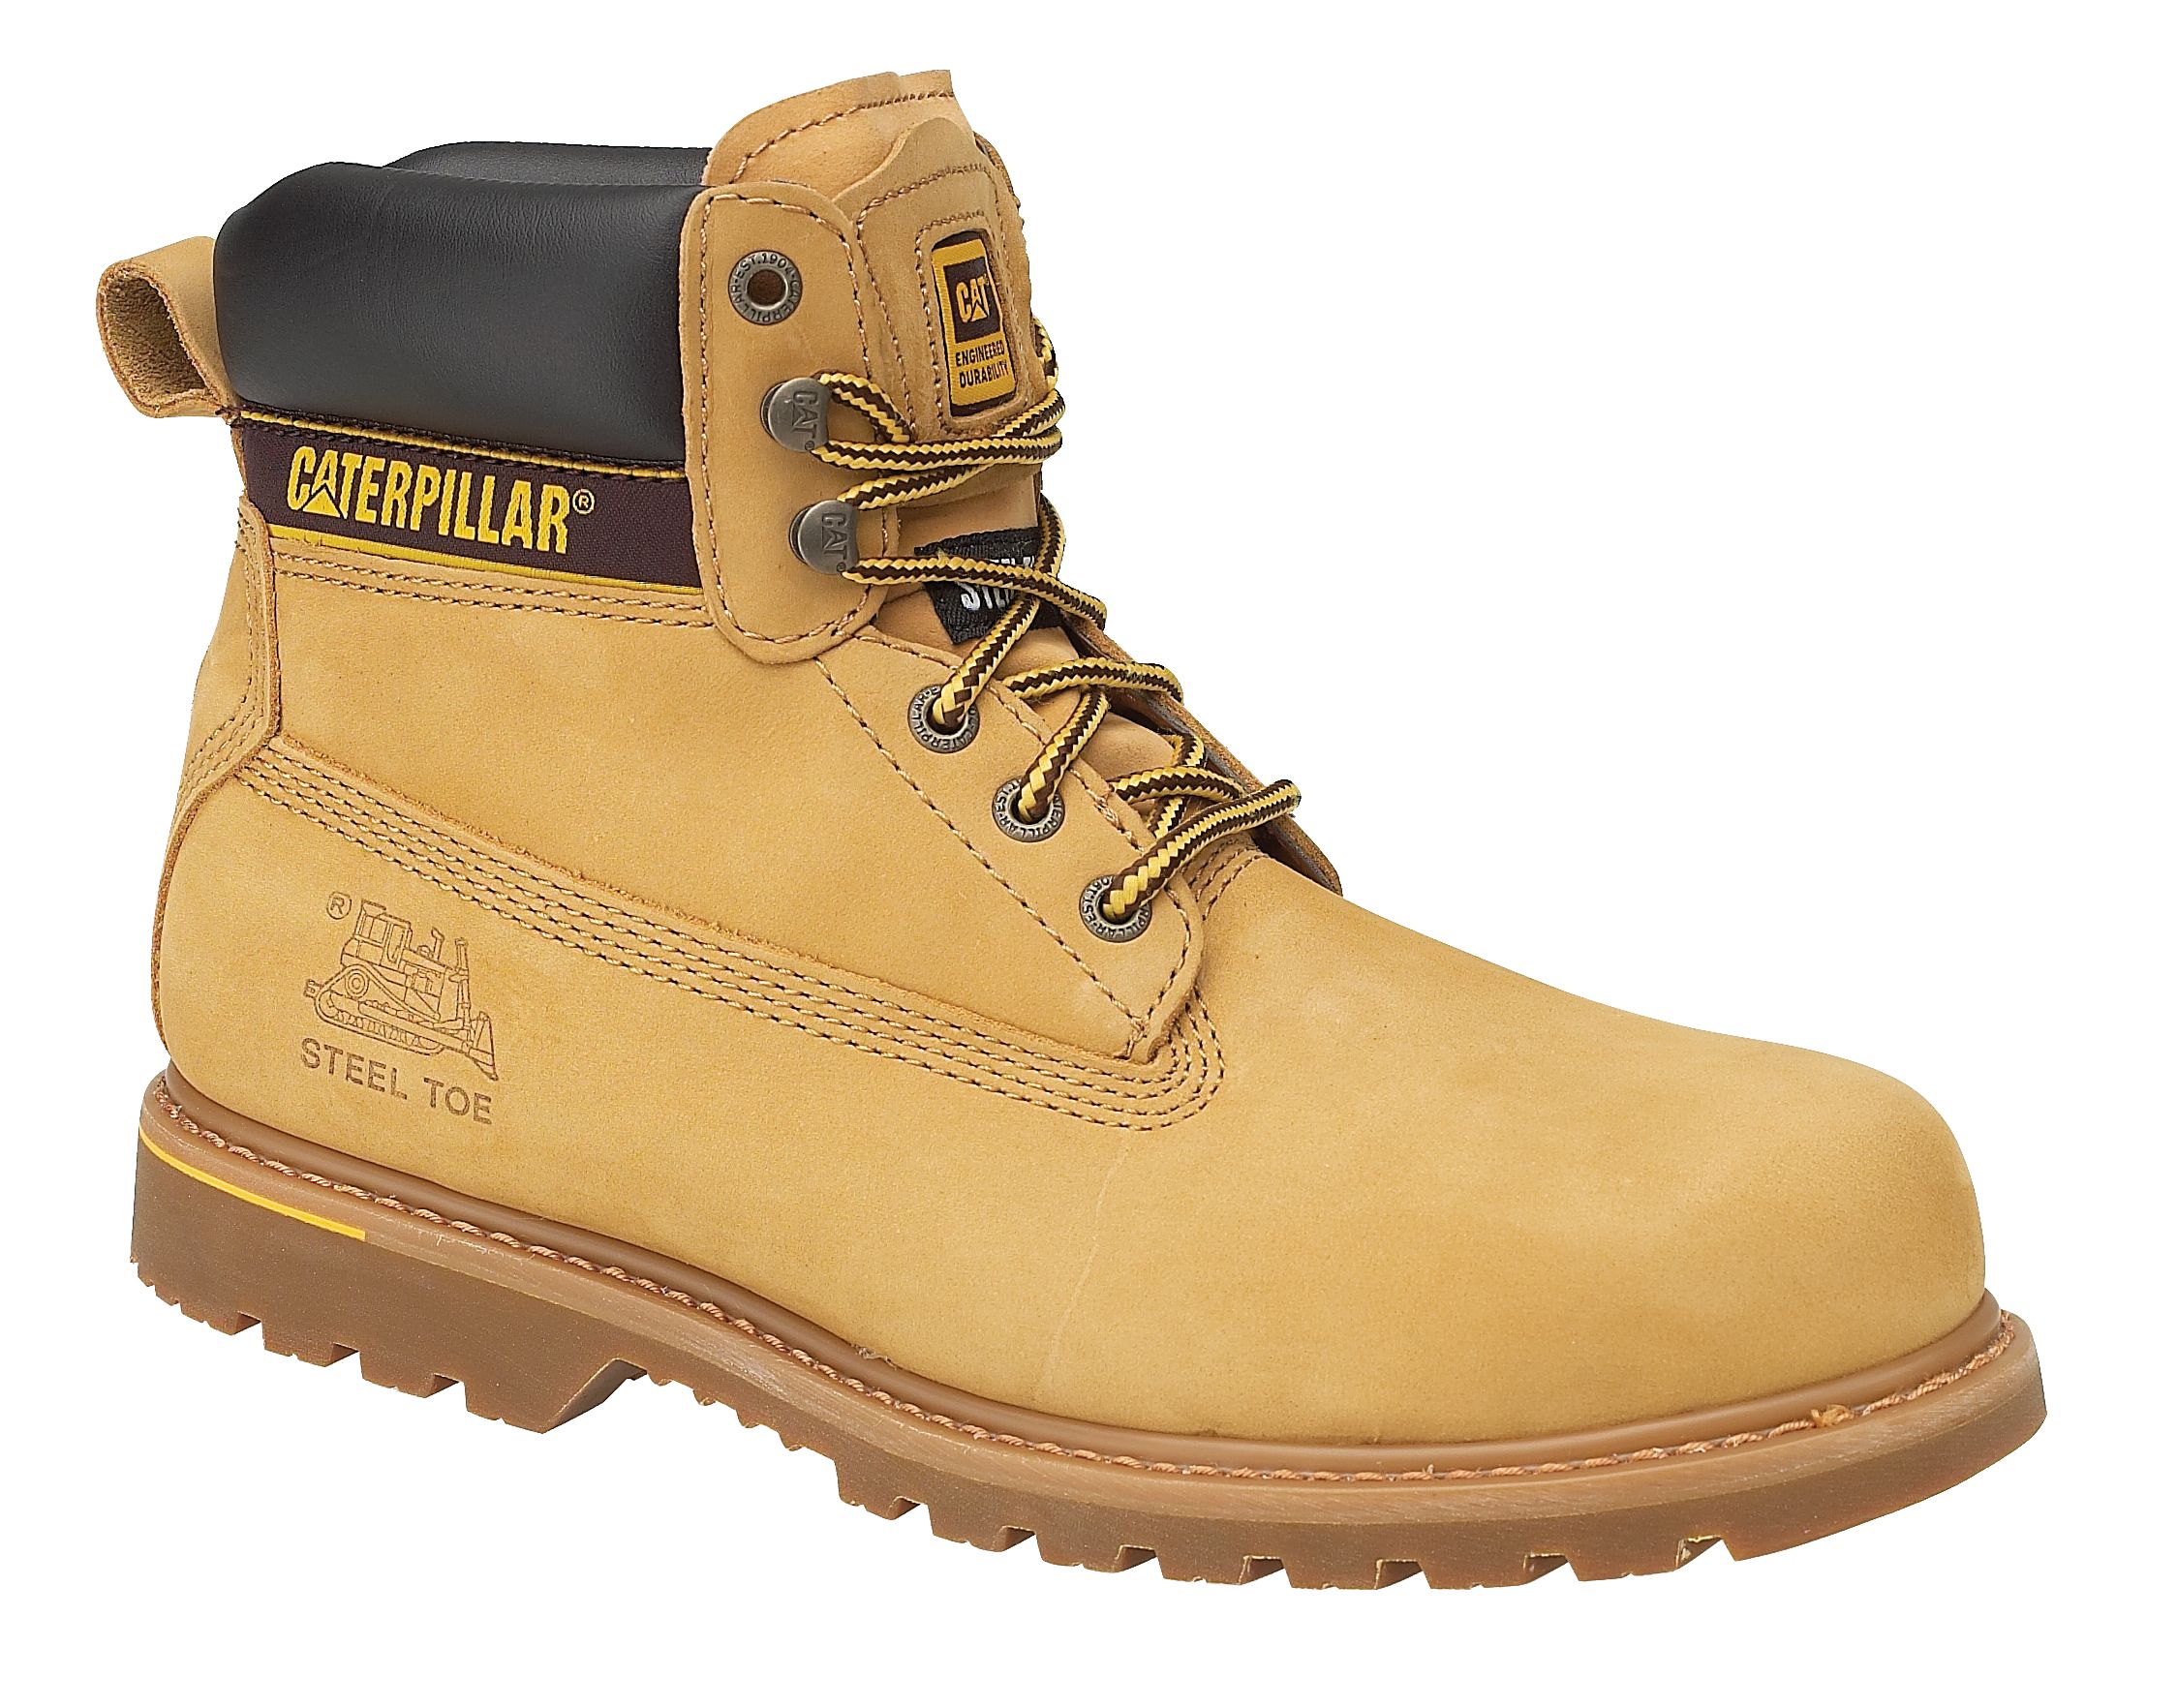 Image of Caterpillar CAT Holton SB Safety Boot - Honey Size 10